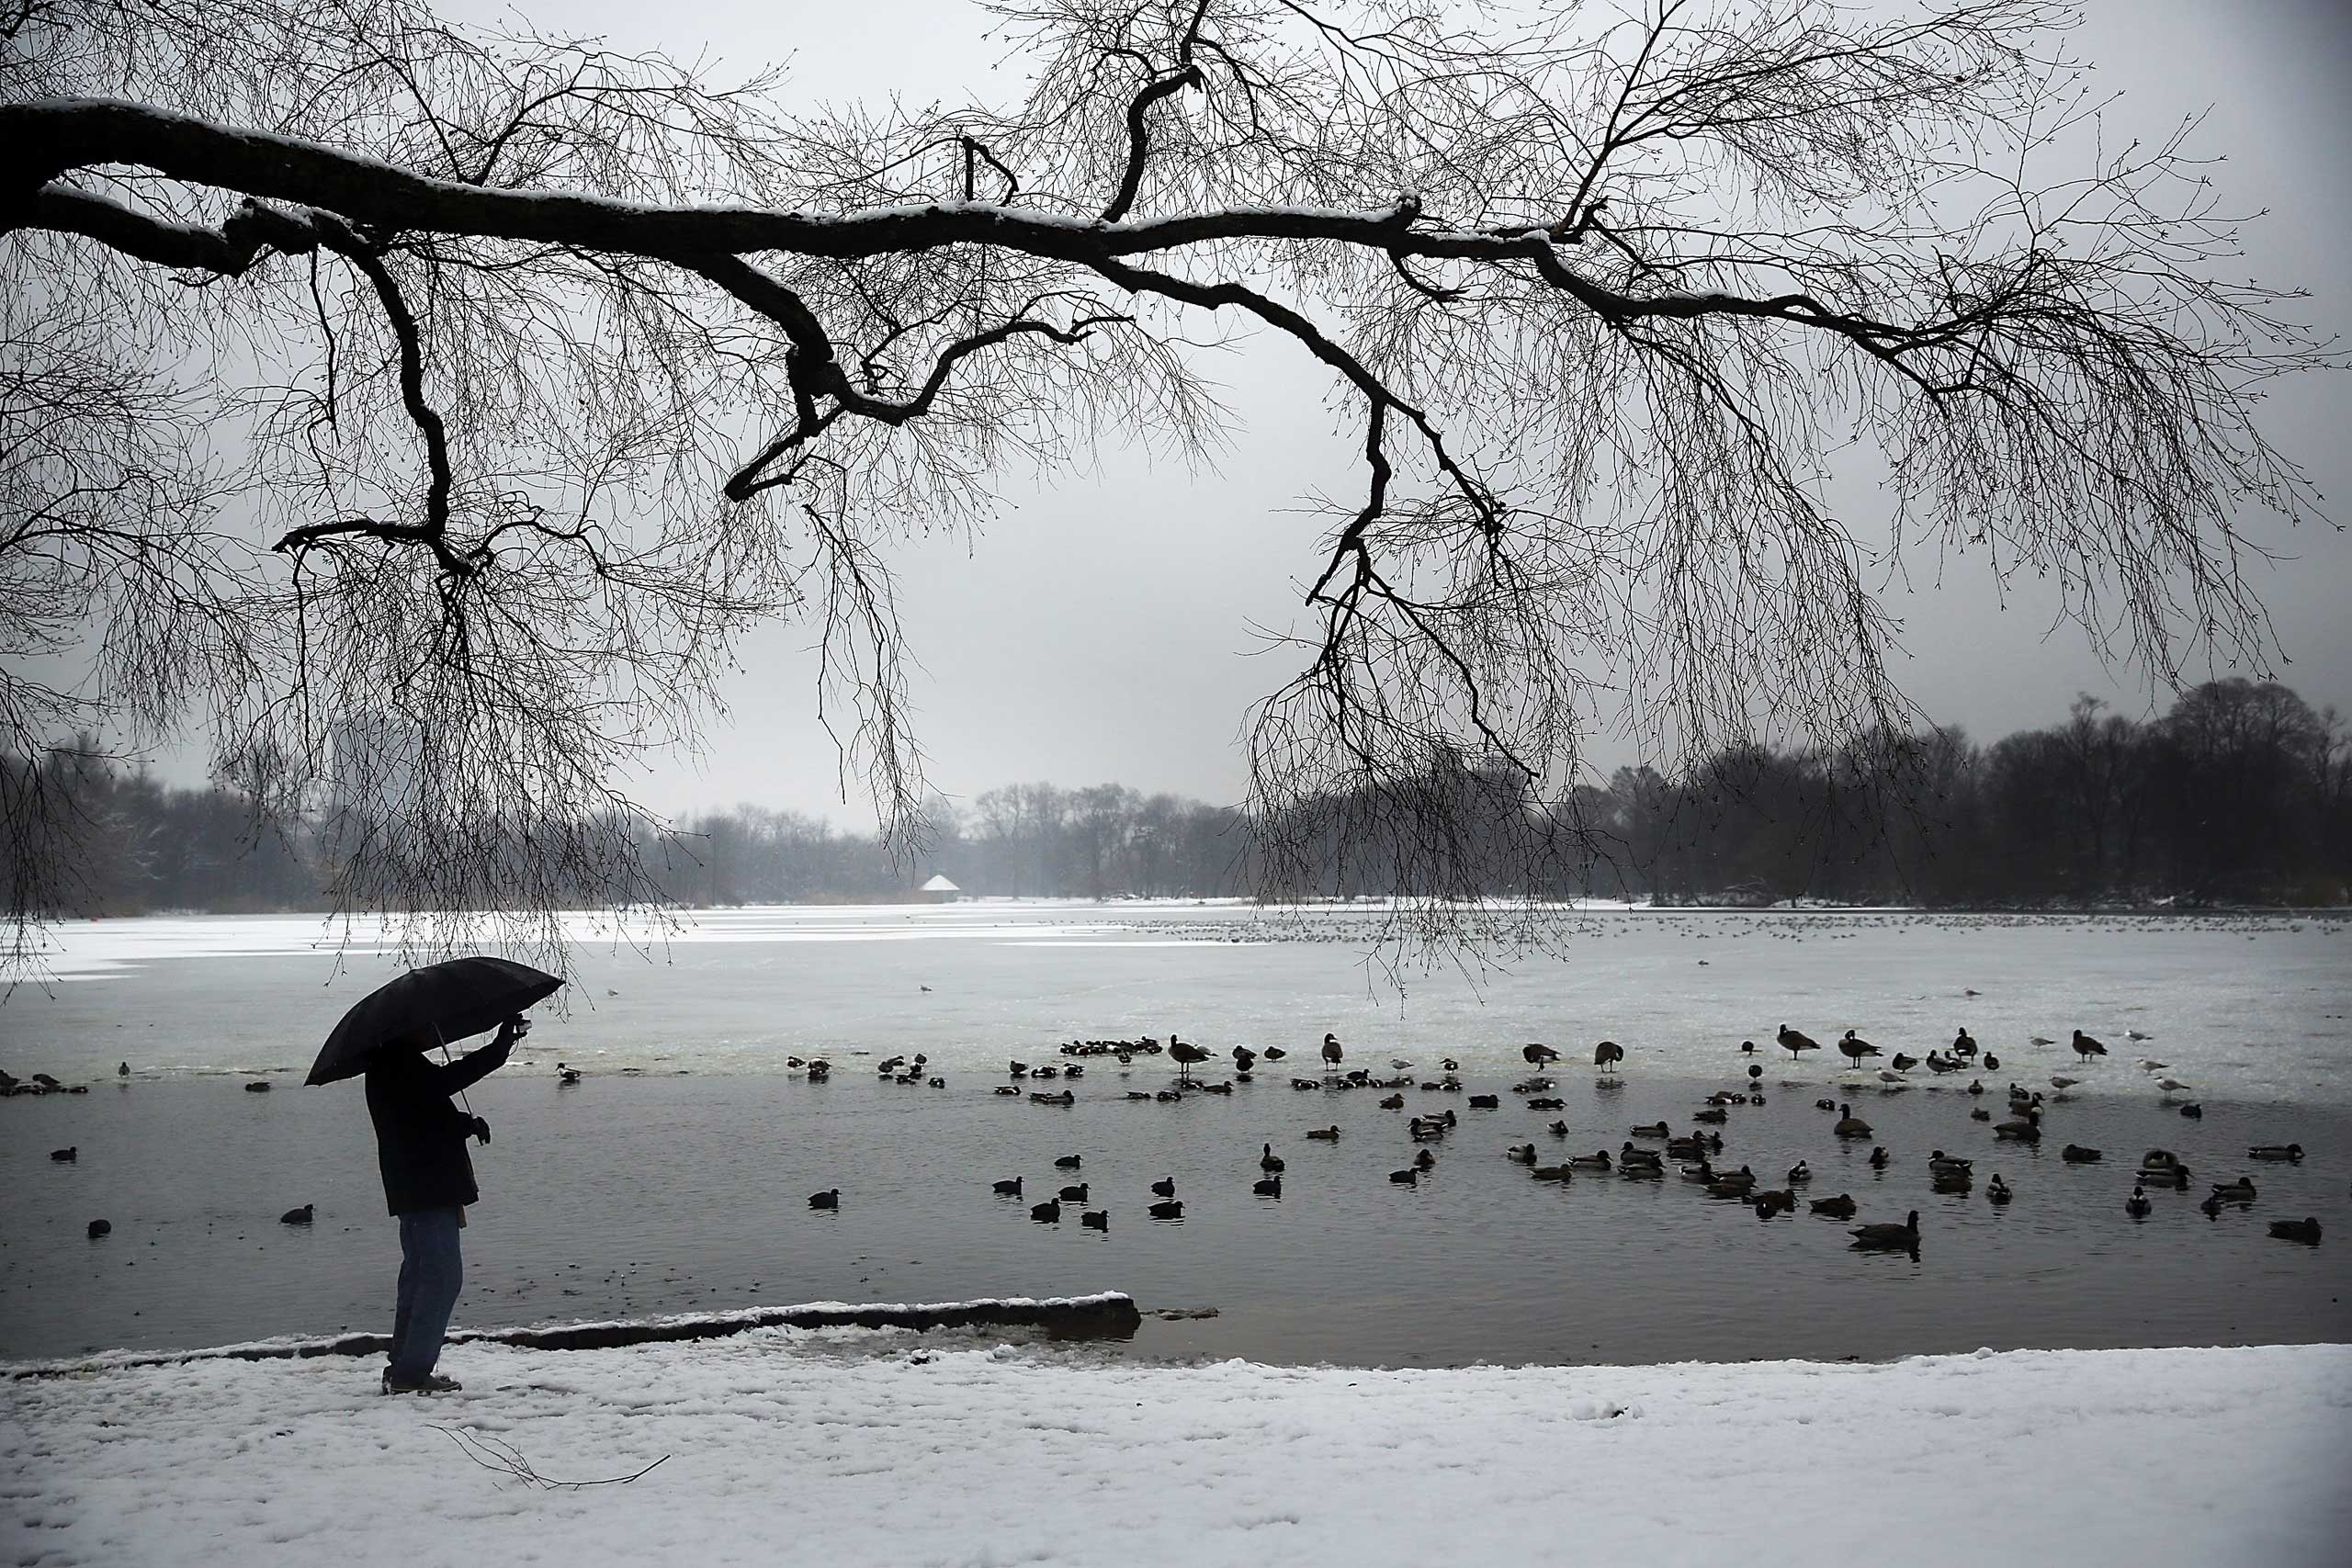 A man takes a picture of ducks and geese at a lake in Brooklyn's Prospect Park following an evening storm on Jan. 24, 2015 in New York City. (Spencer Platt—Getty Images)